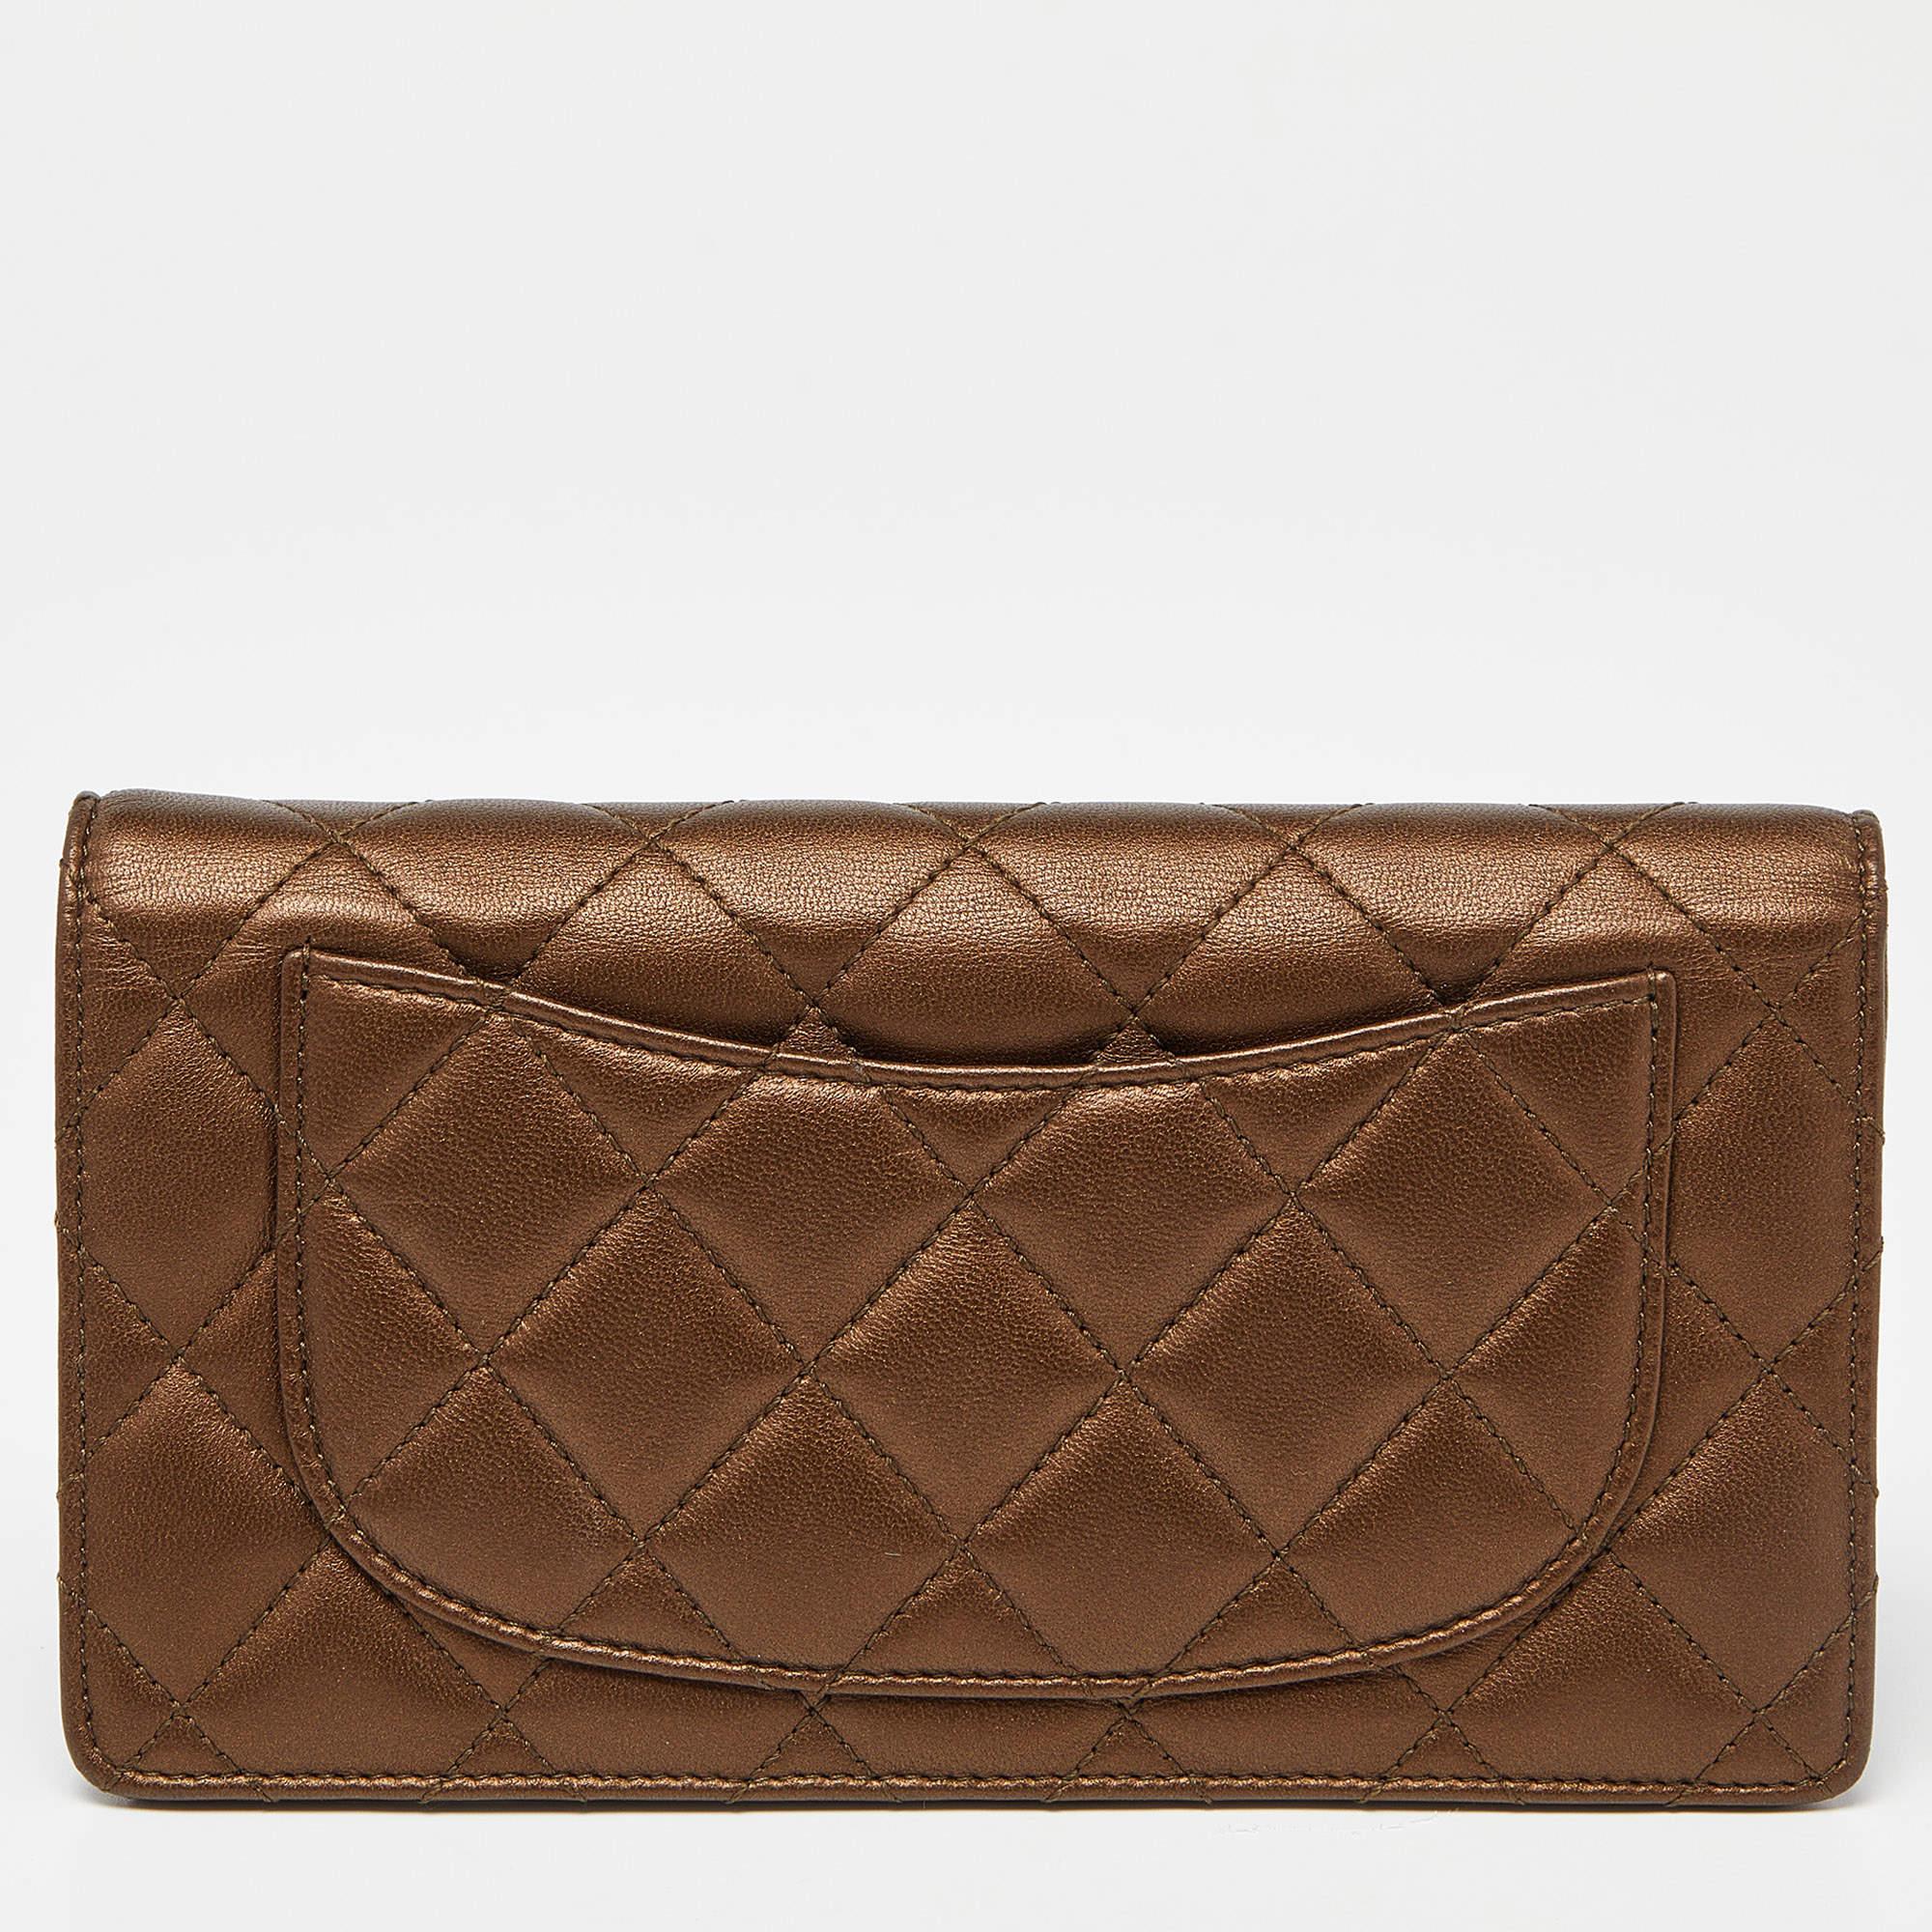 This gorgeous L Yen continental wallet from the house of Chanel is crafted from leather and carries a lovely quilted exterior. Styled with a CC logo on the flap, the wallet is equipped with multiple card slots, a coin pocket, and open compartments